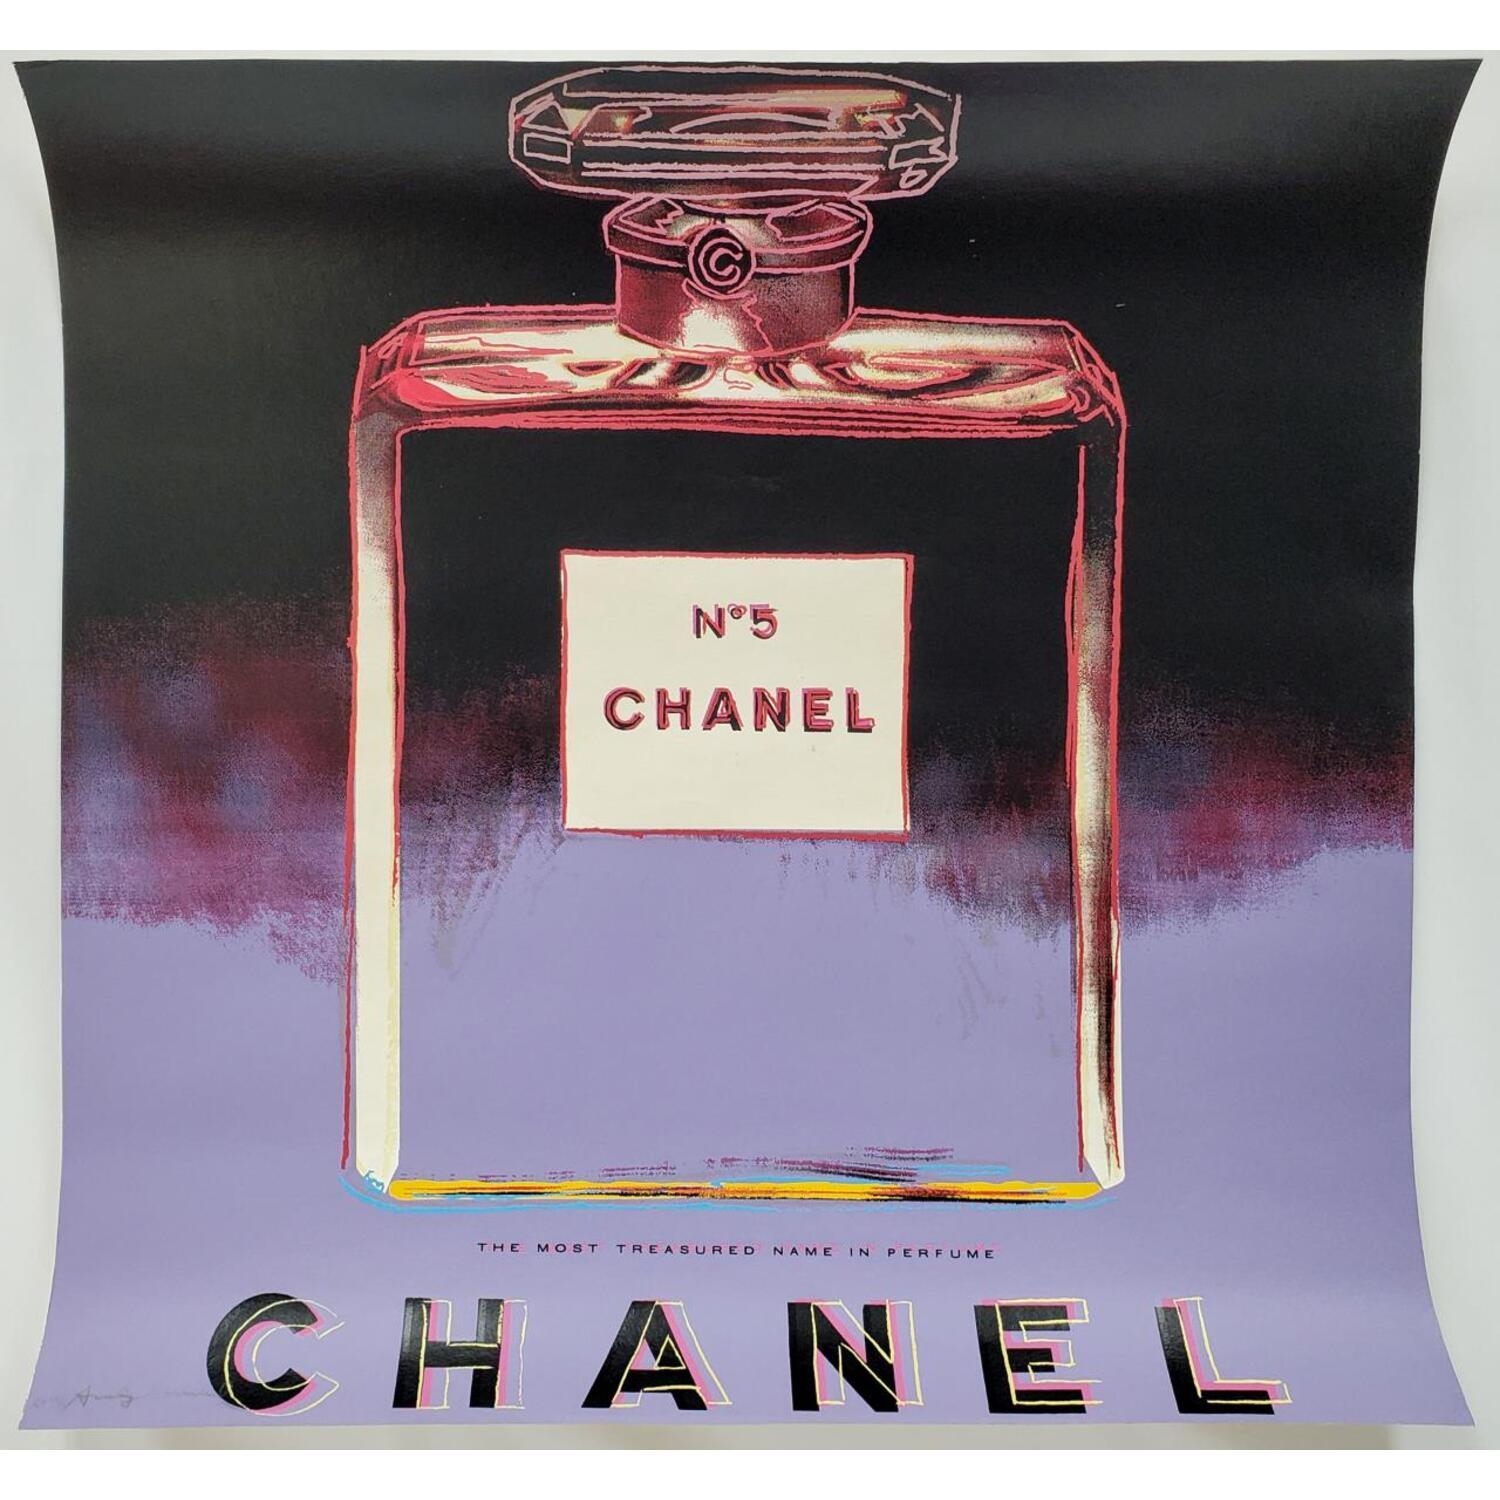 Chanel No. 5 by Andy Warhol, 1985